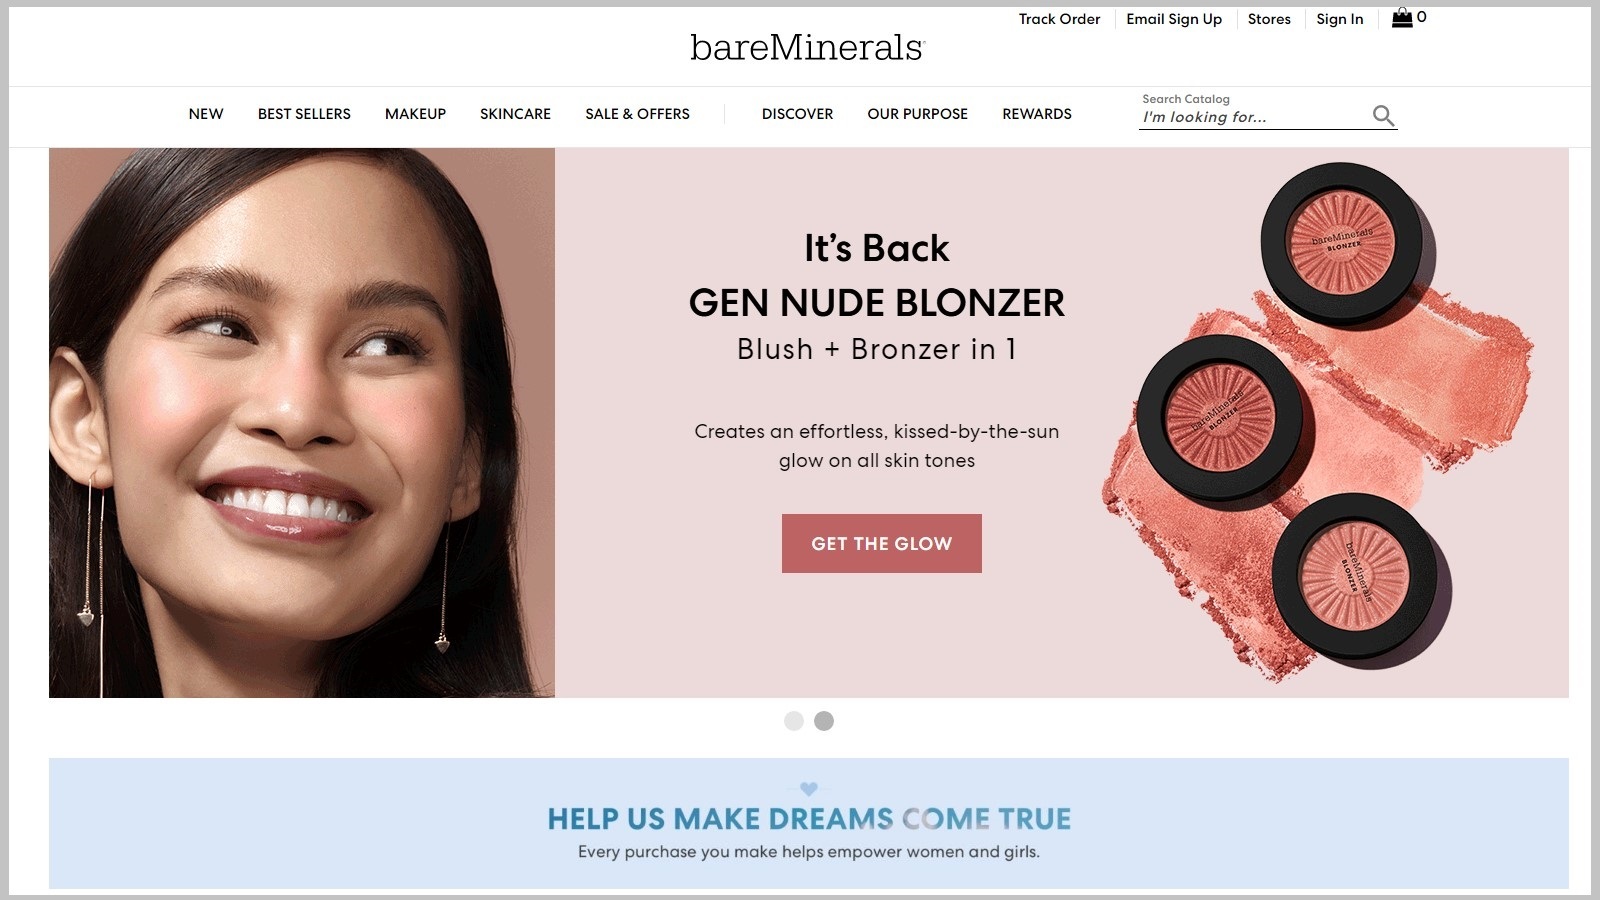 BareMinerals Review: Why People Love This Brand So Much?